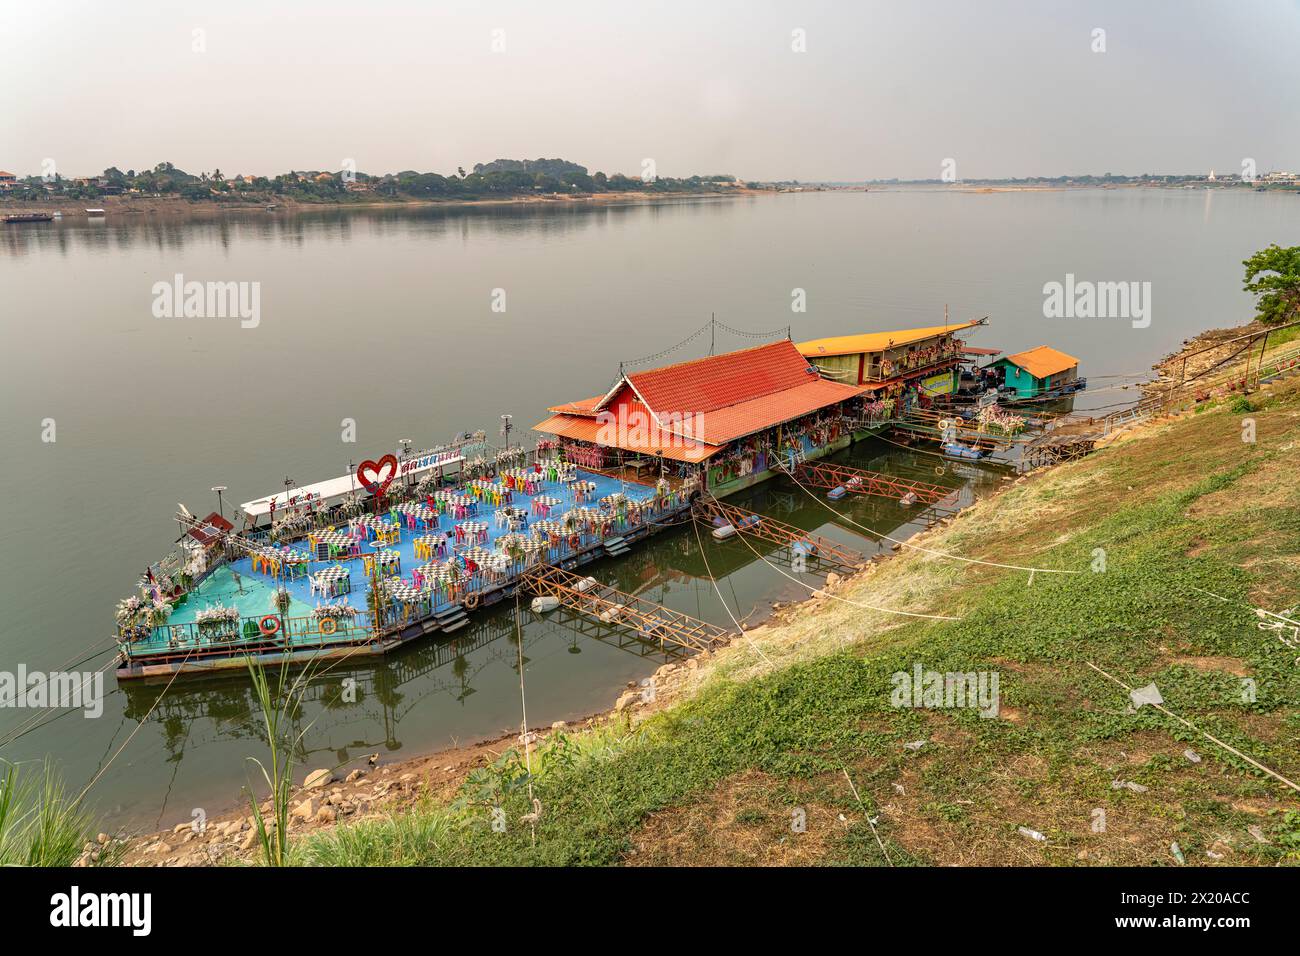 Floating restaurant on the Mekong and the Mekong bank in Nong Khai and Laos, Thailand, Asia Stock Photo